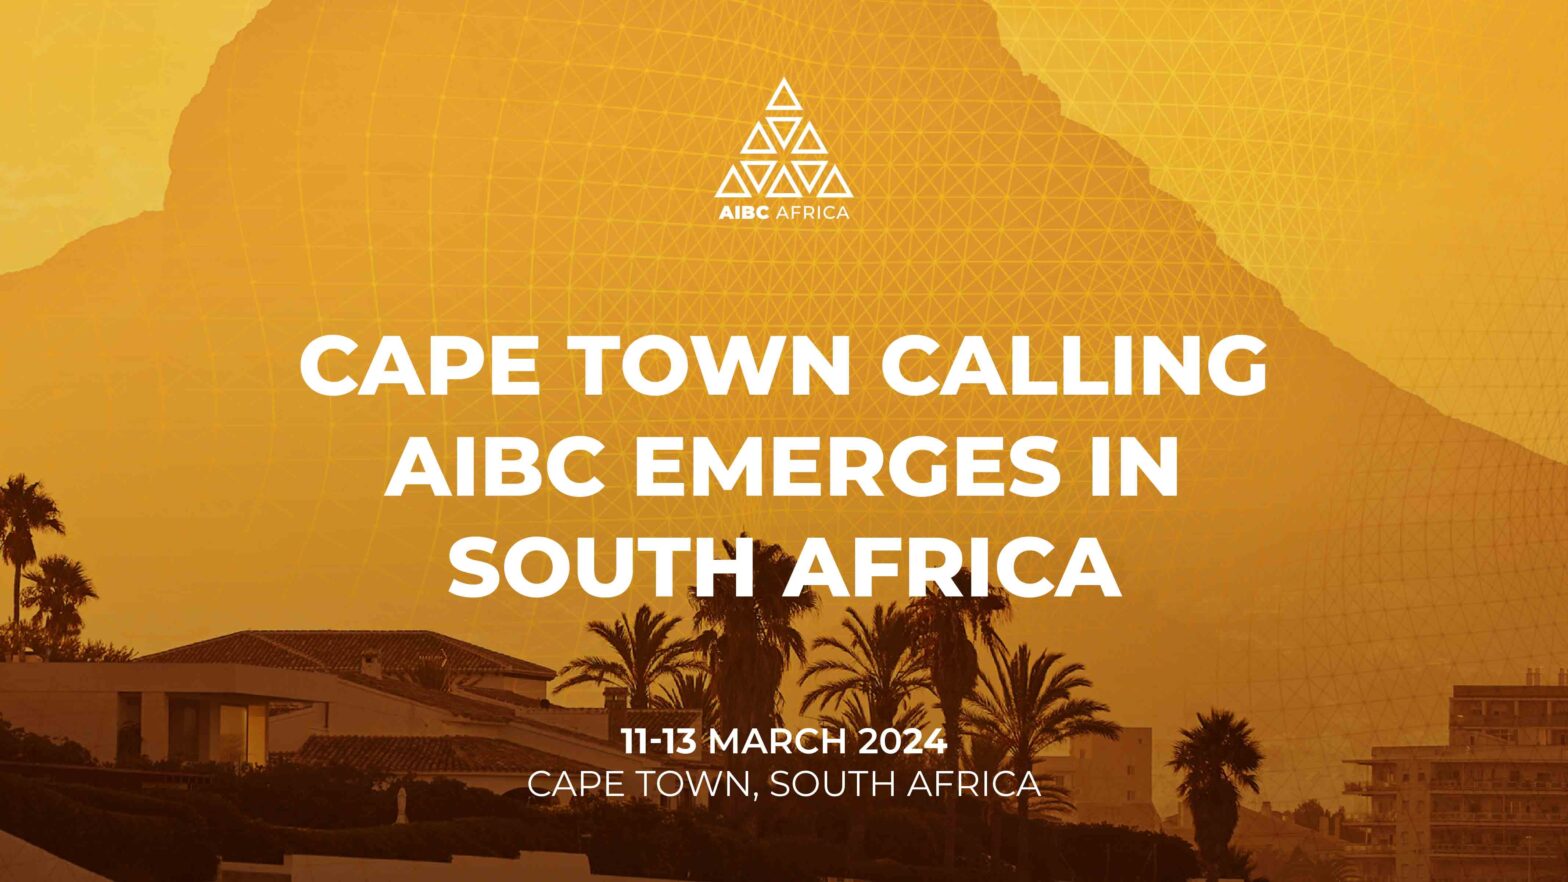 AIBC Africa heads to Cape Town this March